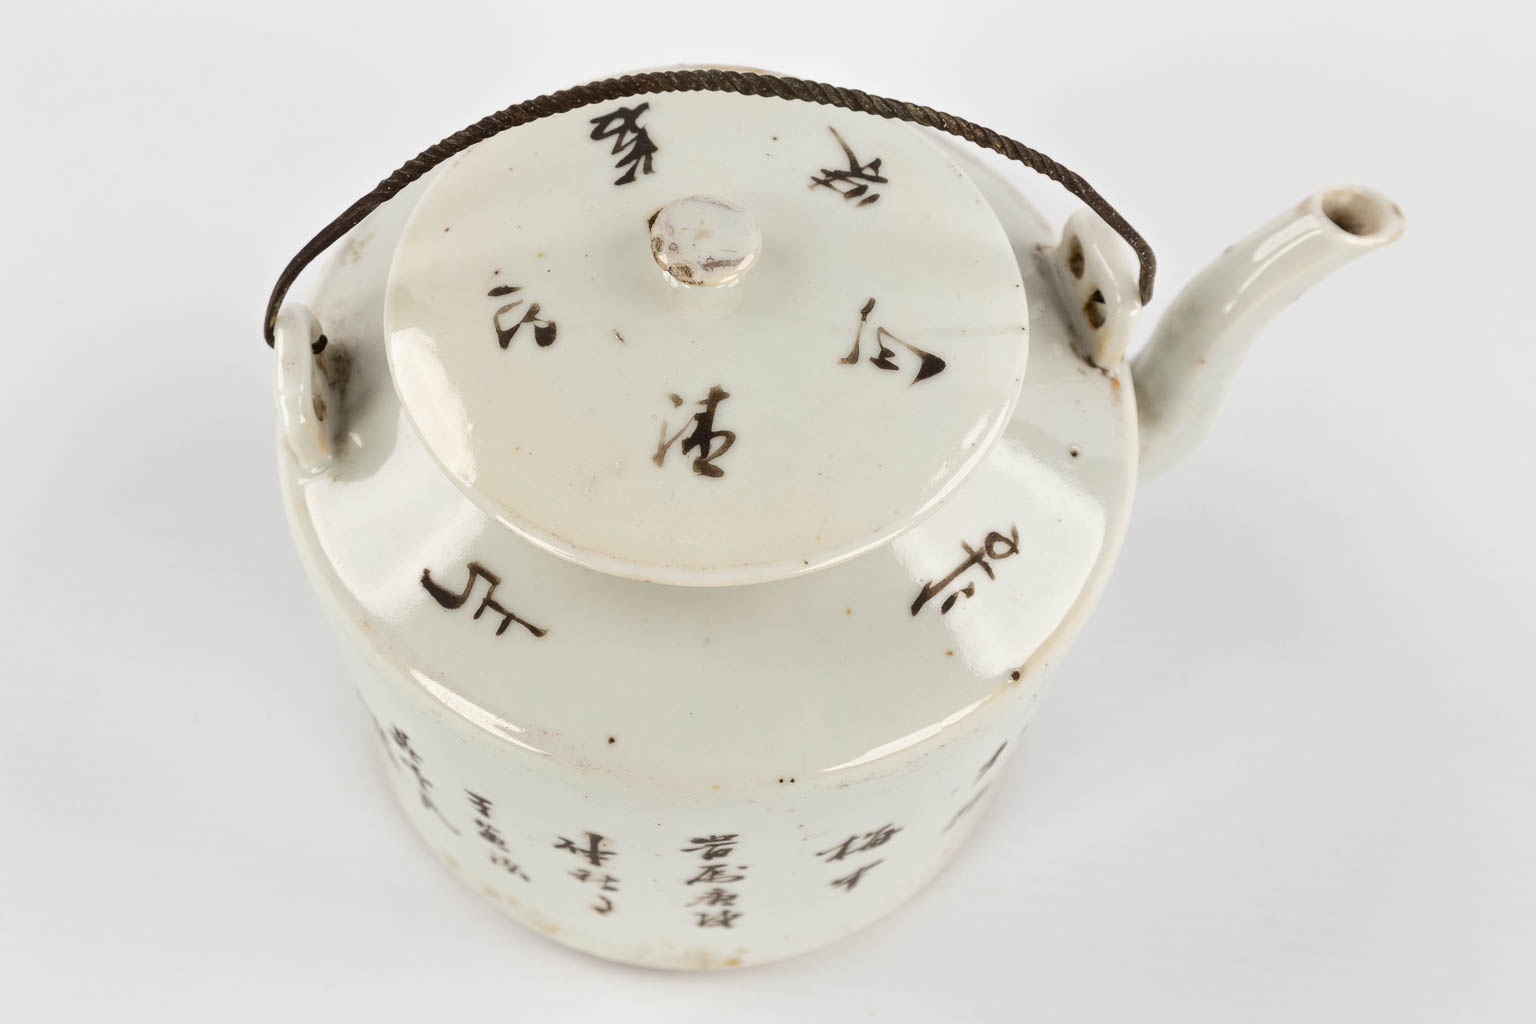 A Chinese tea pot decorated with birds and calligraphic texts. 19th/20th C. (D:12 x W:16 x H:13 cm)